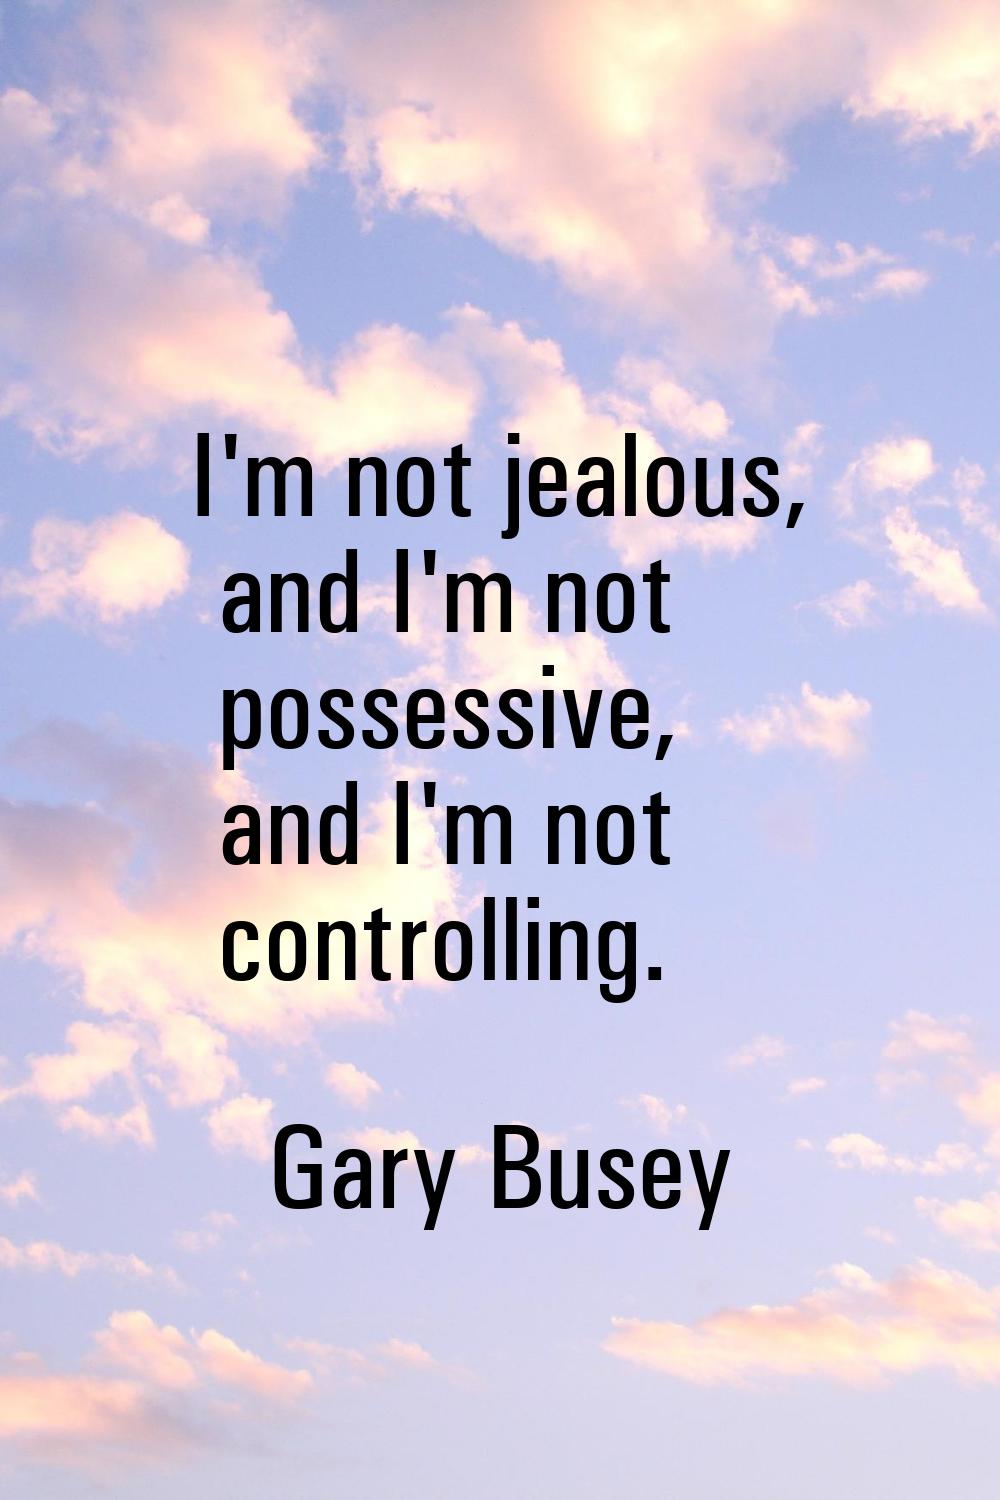 I'm not jealous, and I'm not possessive, and I'm not controlling.